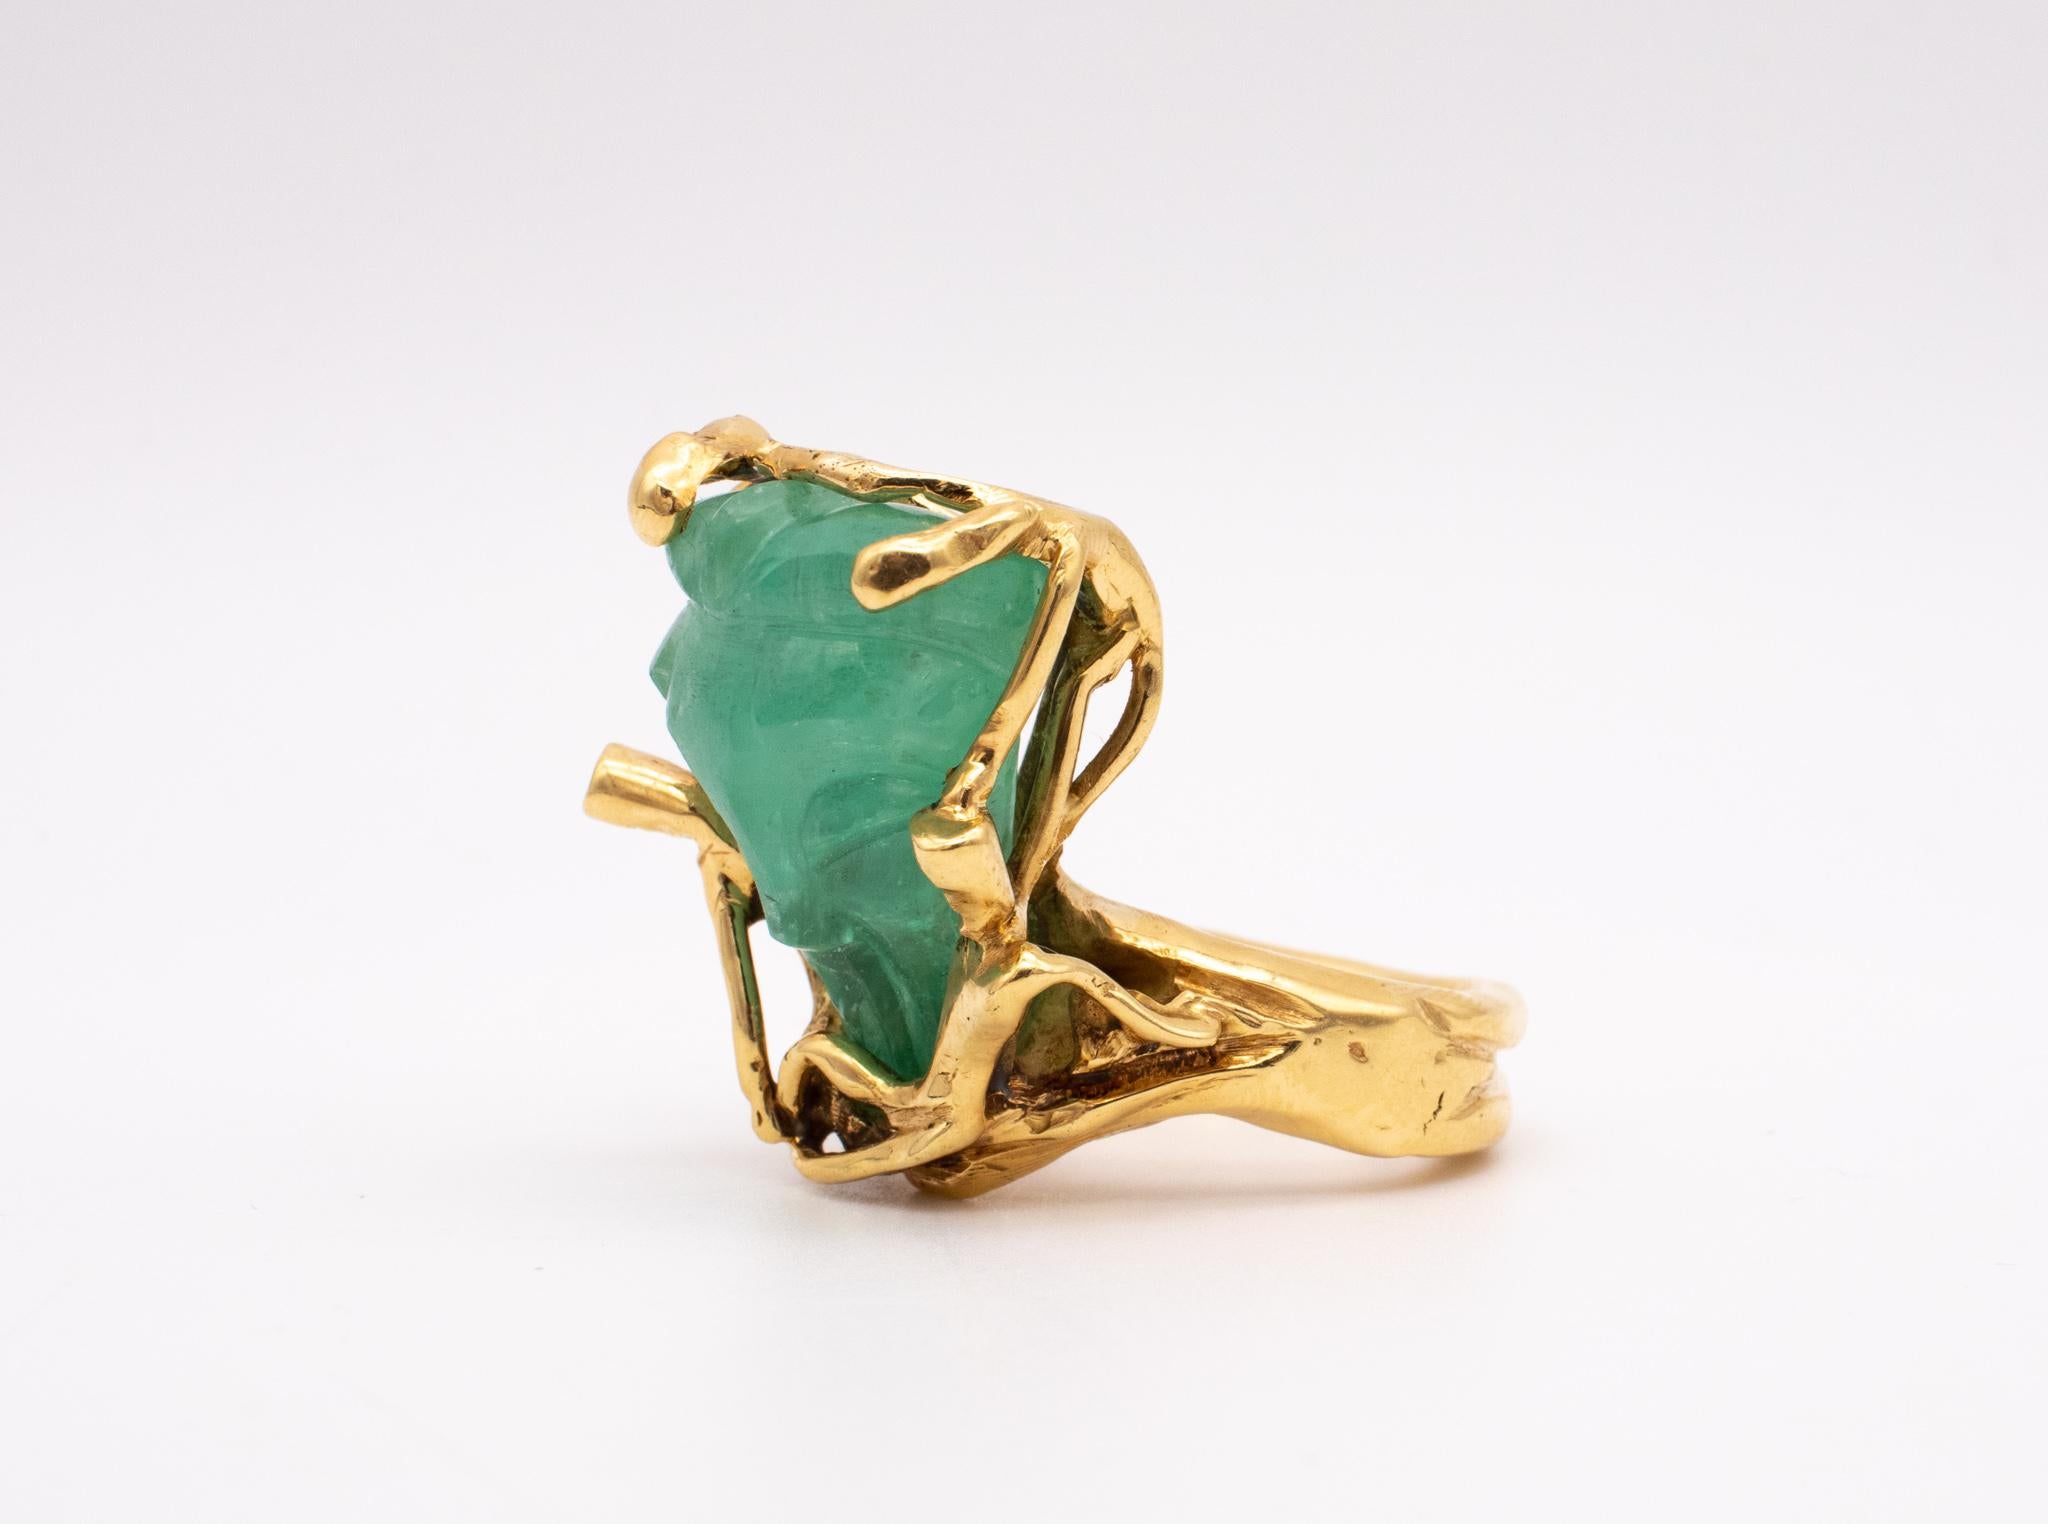 Eric De Kolb 1960 Rare Statement Ring in 18Kt Gold with 28.53 Cts Carved Emerald 1